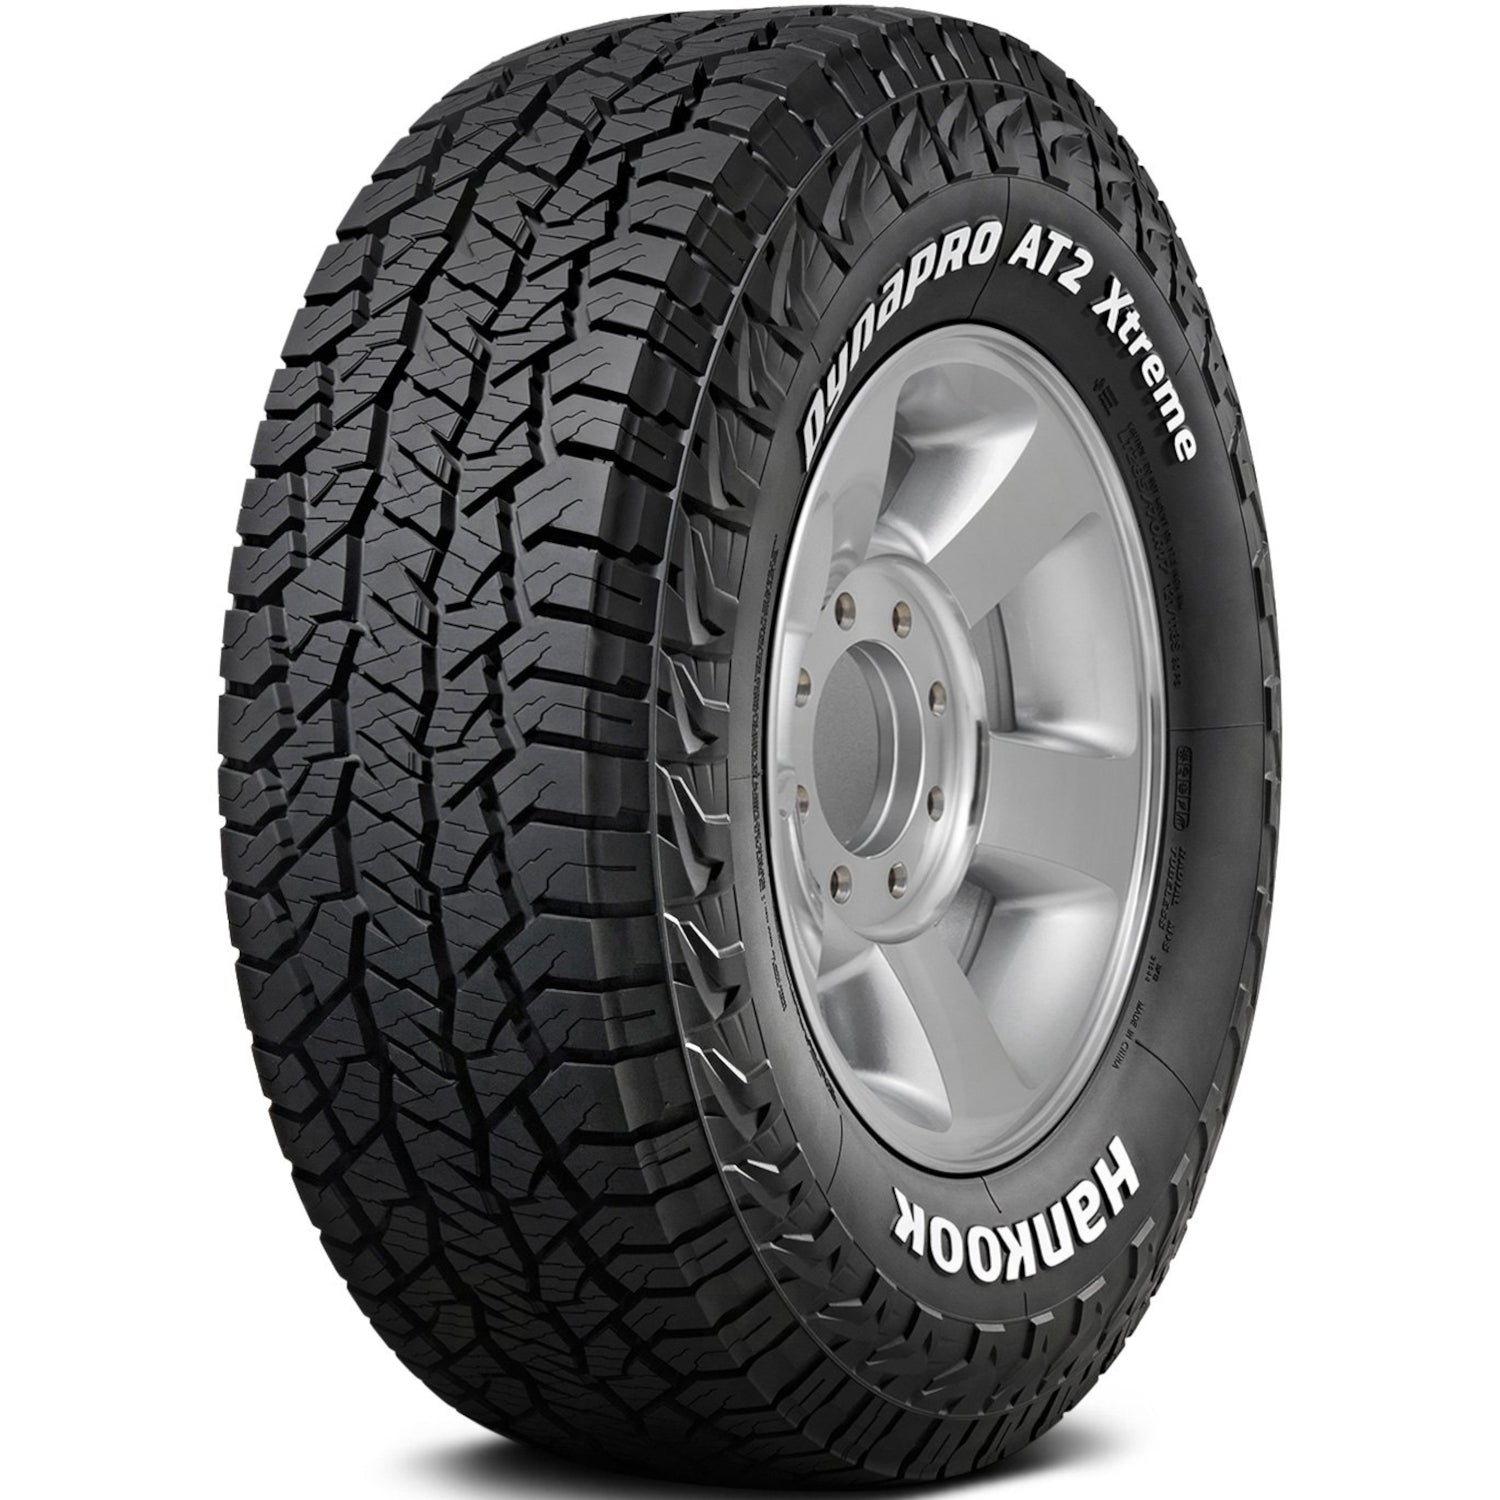 HANKOOK DYNAPRO AT2 XTREME 215/70R16 (27.8X8.5R 16) Tires